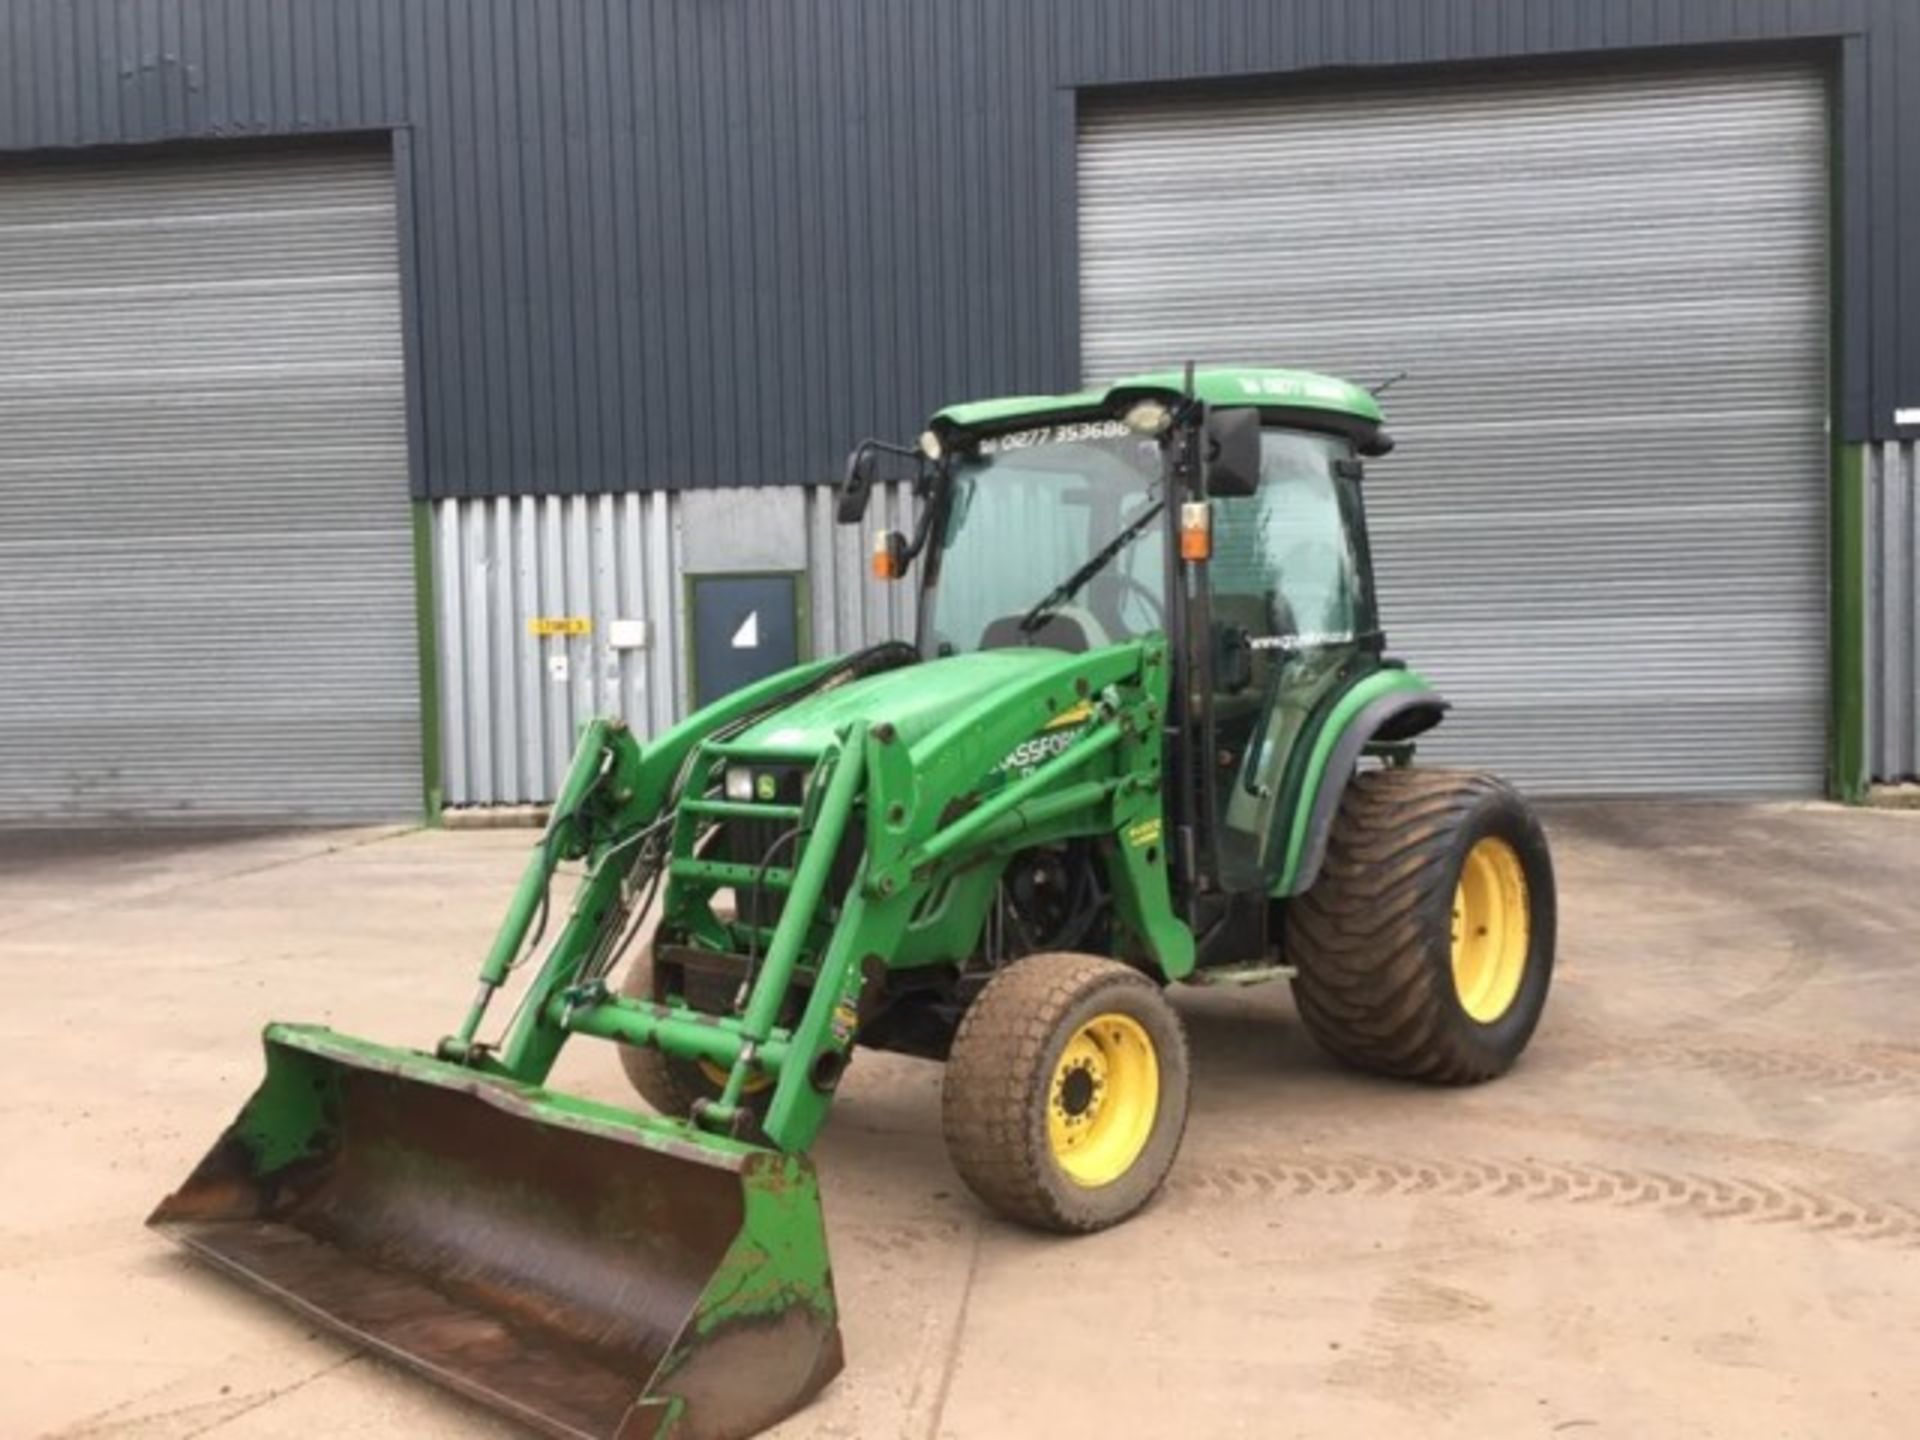 John Deere 4720 compact tractor fitted with grassland tyres, 66 HP, with 400CX front loader,